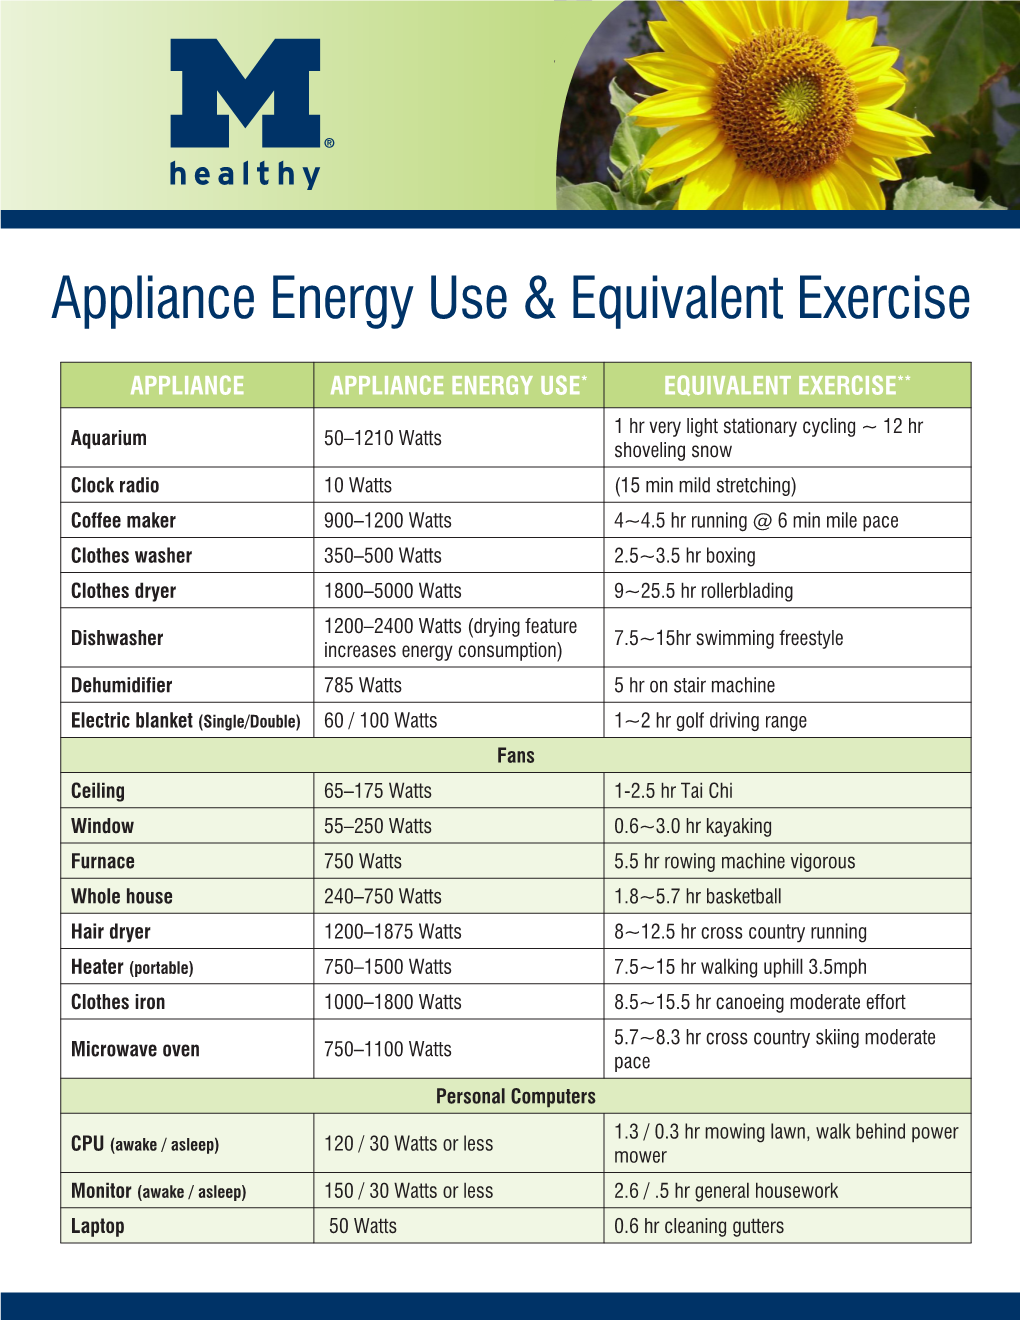 Appliance Energy Use & Equivalent Exercise